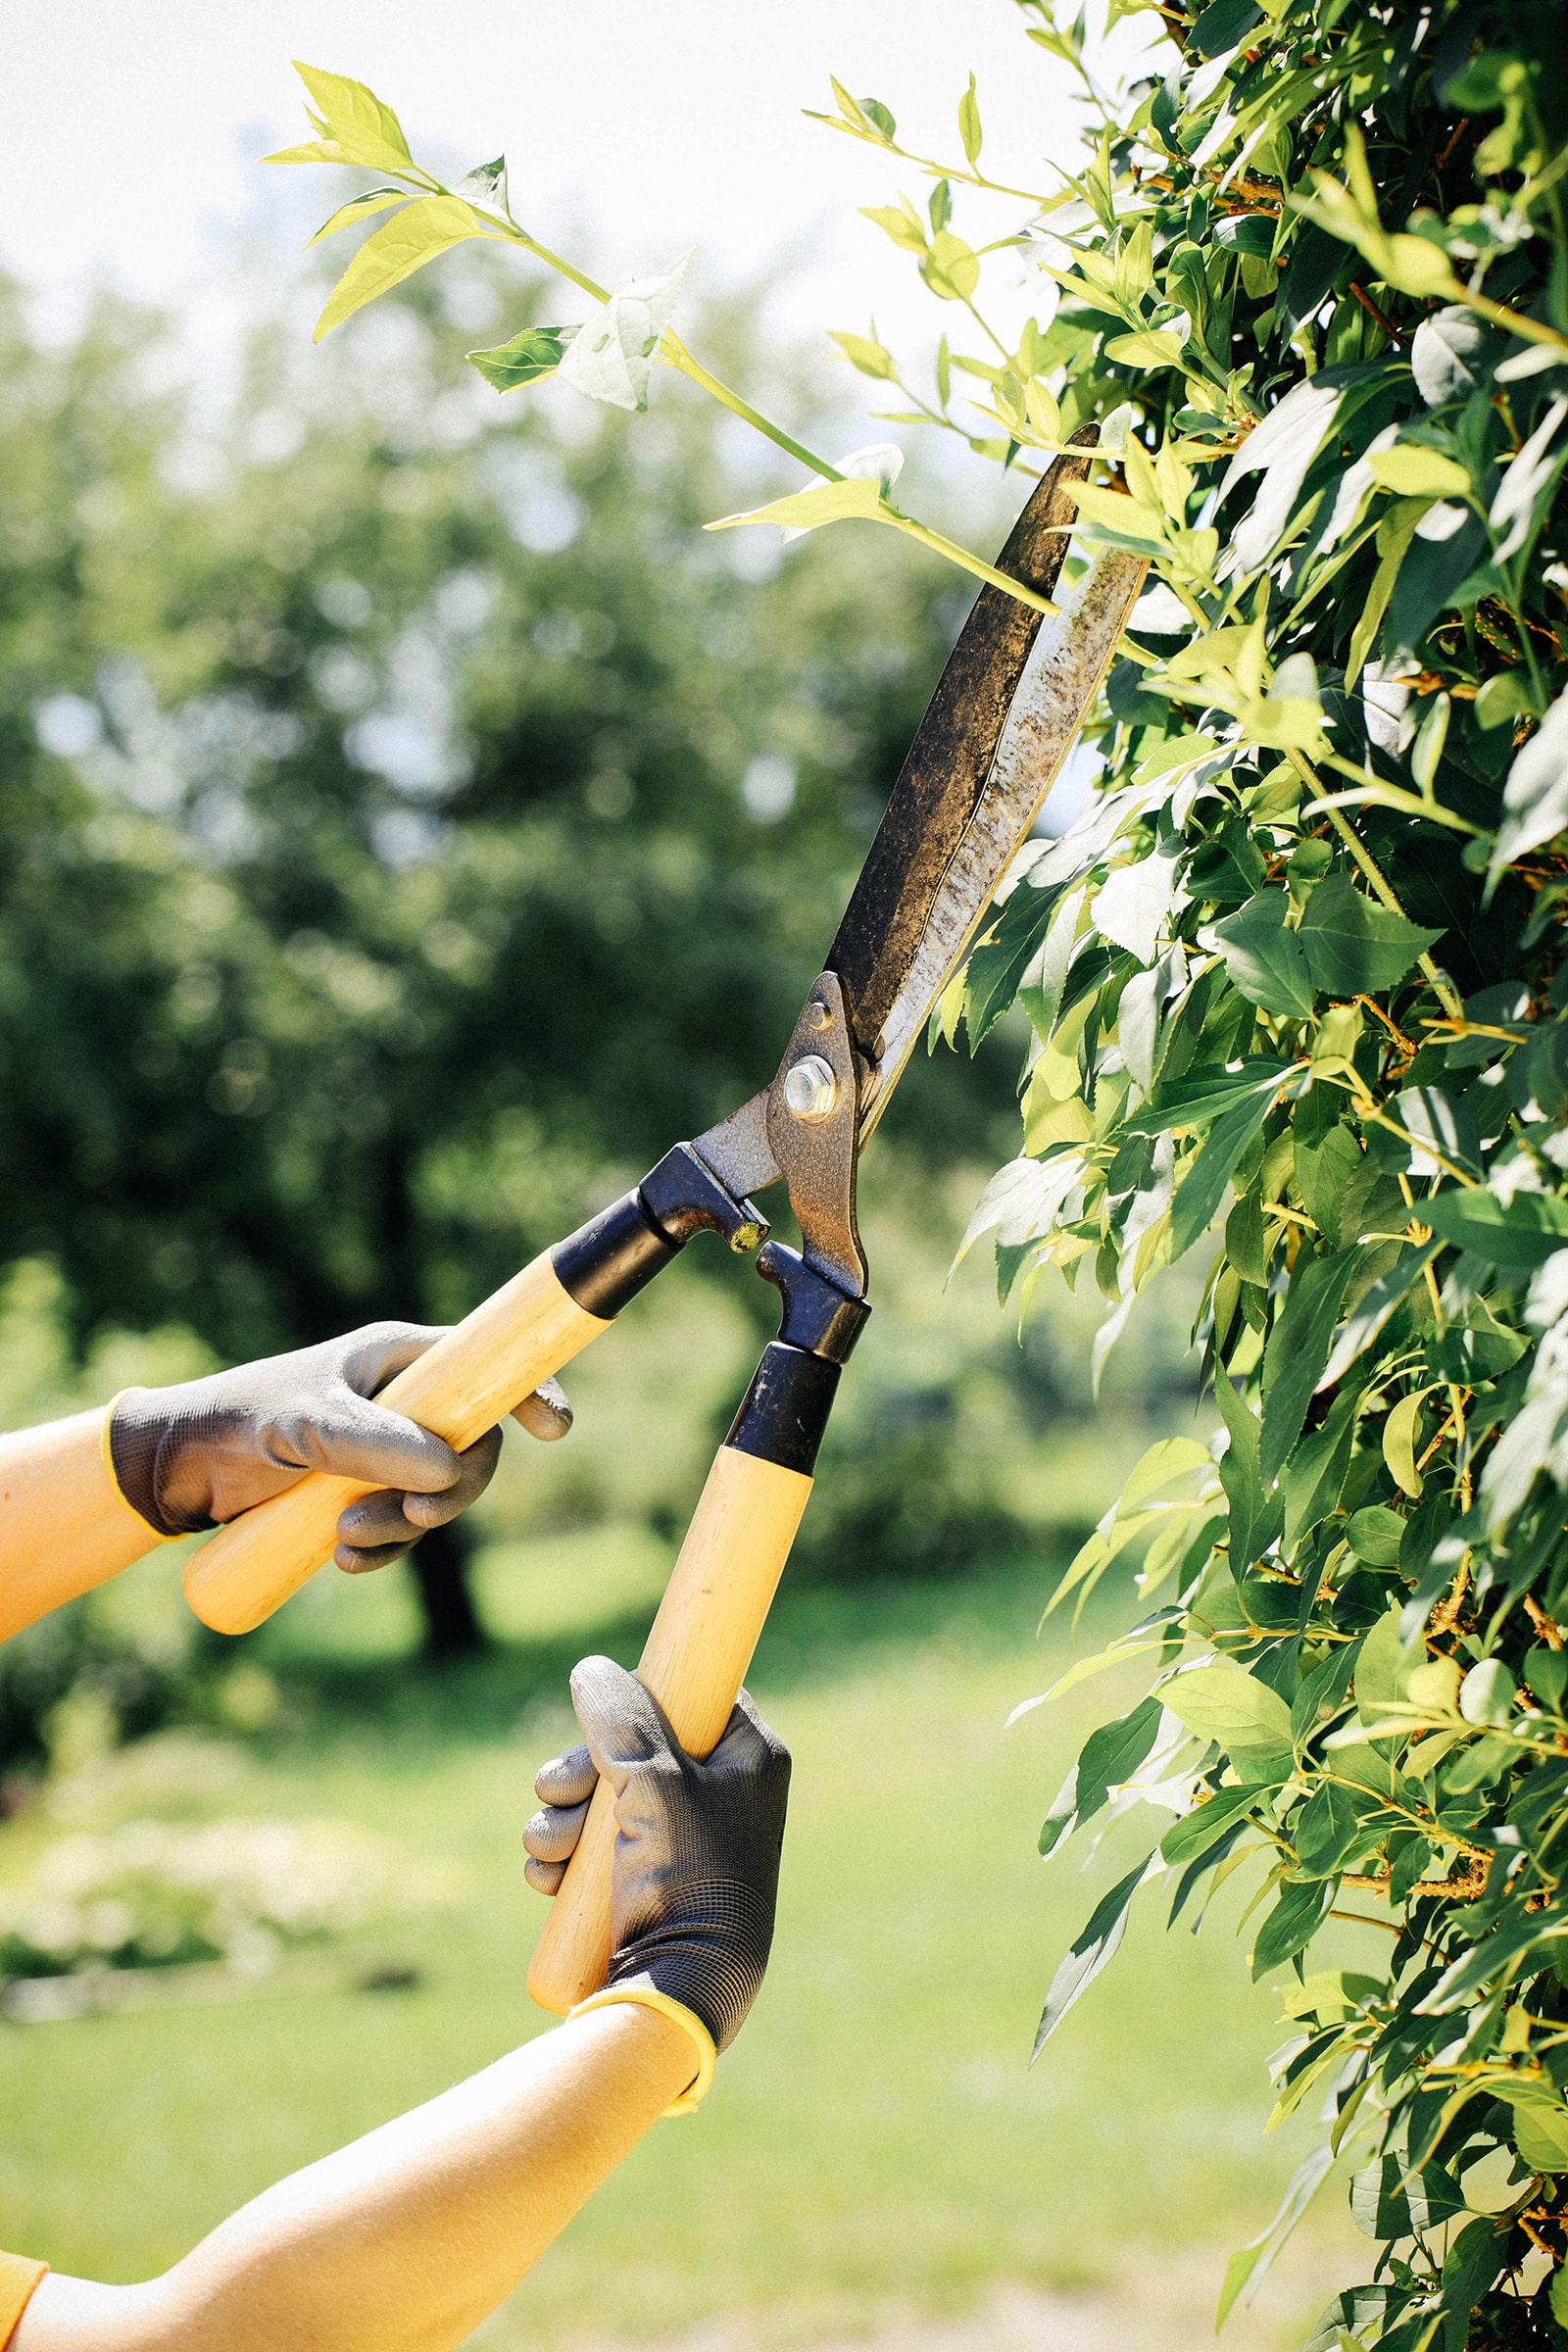 The best hedge trimmers for your garden